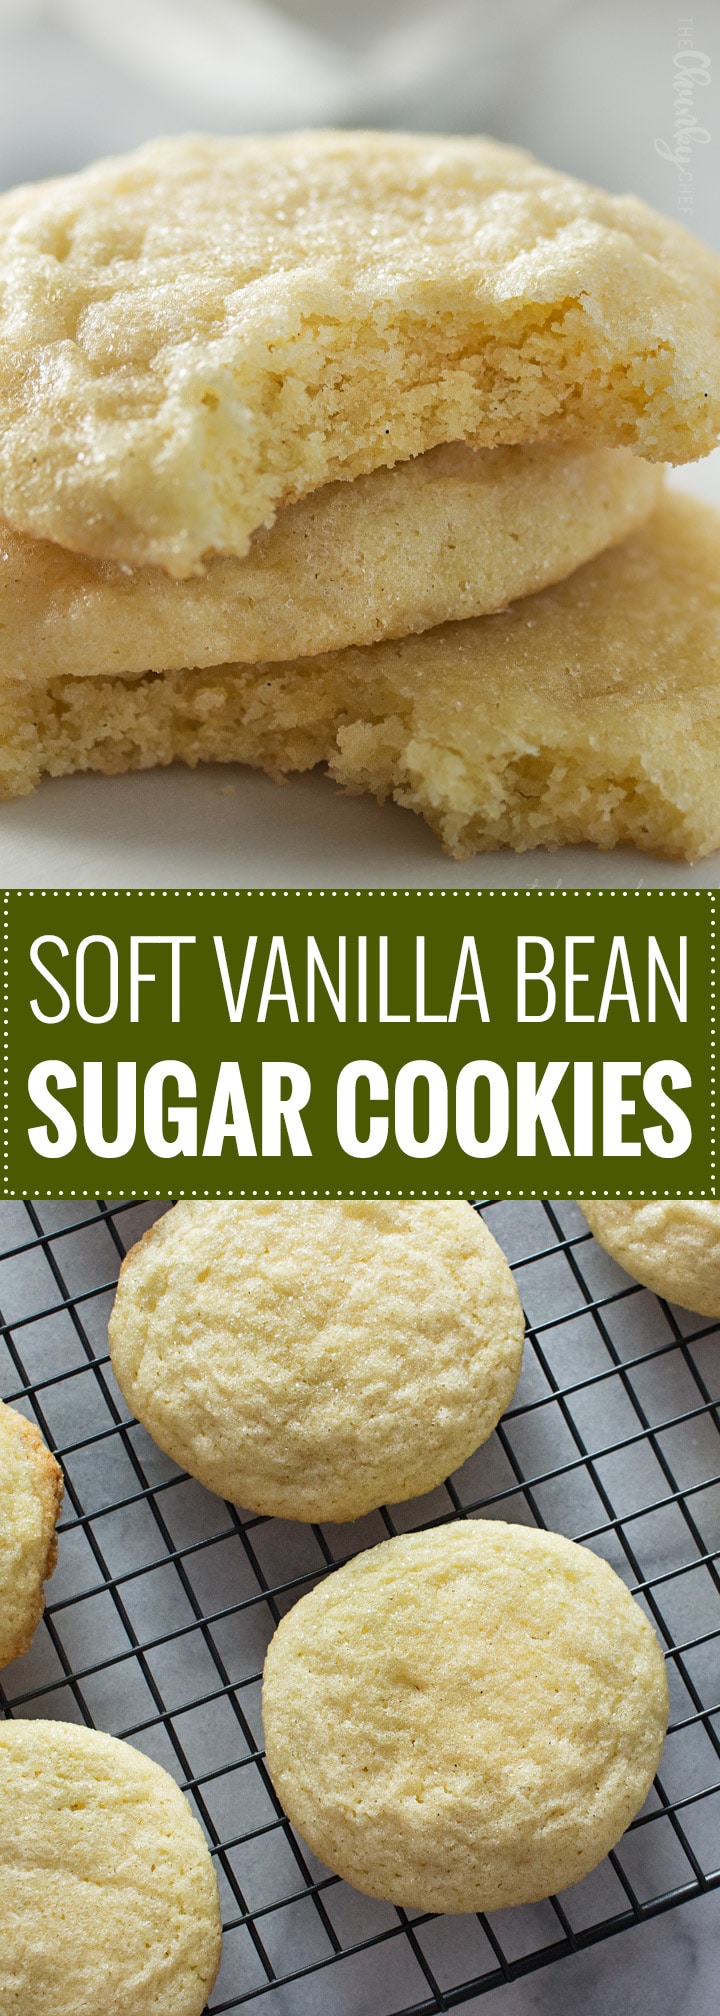 Soft Vanilla Bean Sugar Cookies | If you like soft and chewy sugar cookies, then this is THE recipe for you!  Rolled in granulated sugar, these thick cookies have a buttery richness and plenty of vanilla flavor. | The Chunky Chef | #sugarcookies #sugarcookierecipe #holidaybaking #softandchewy #Christmascookies